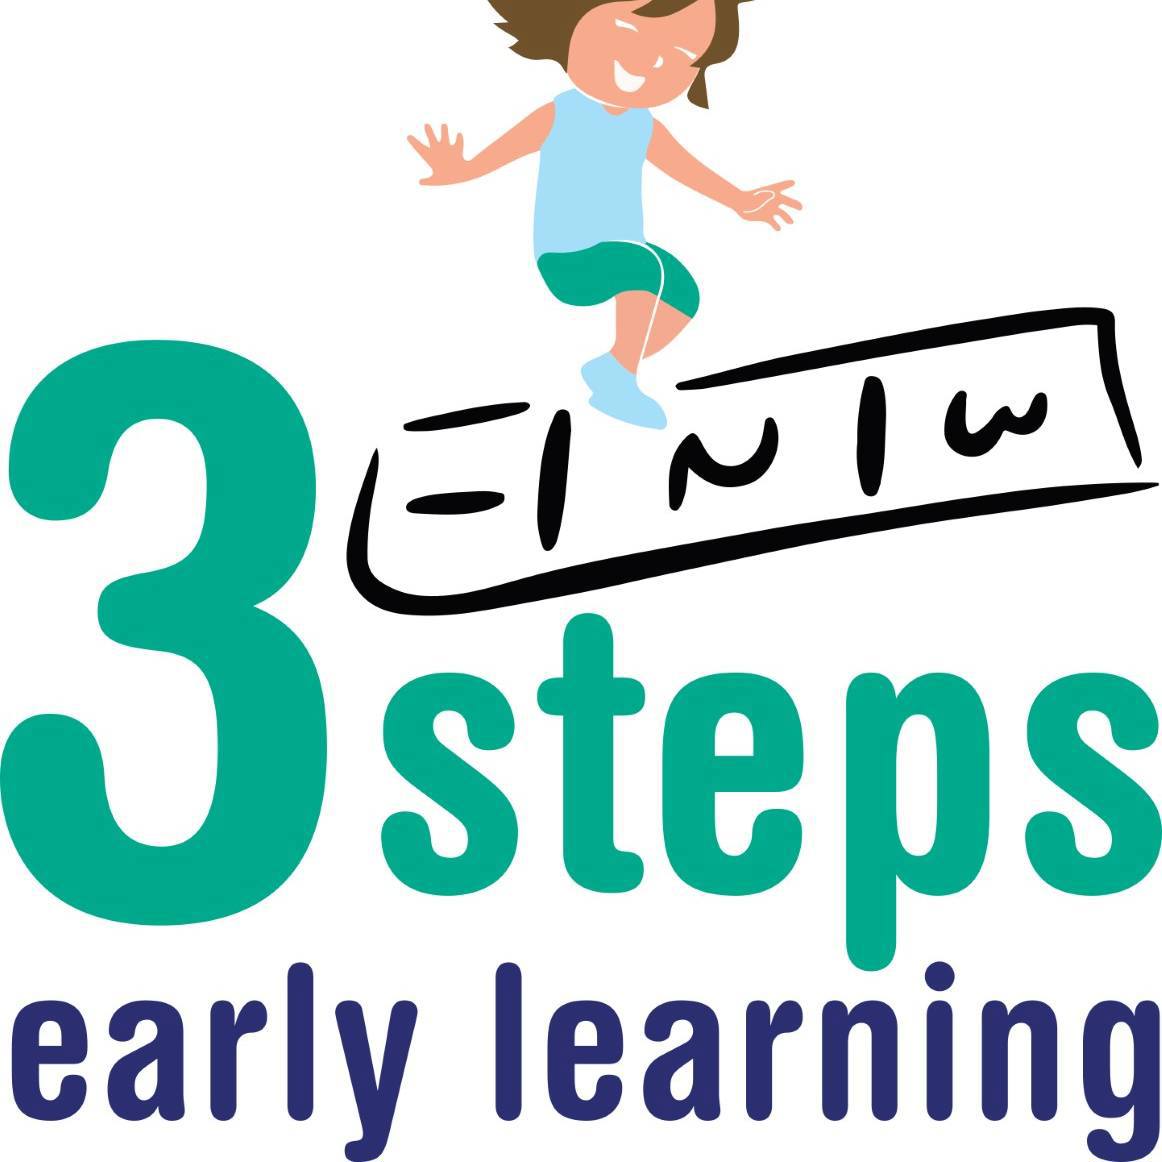 3 Steps Early Learning Camden